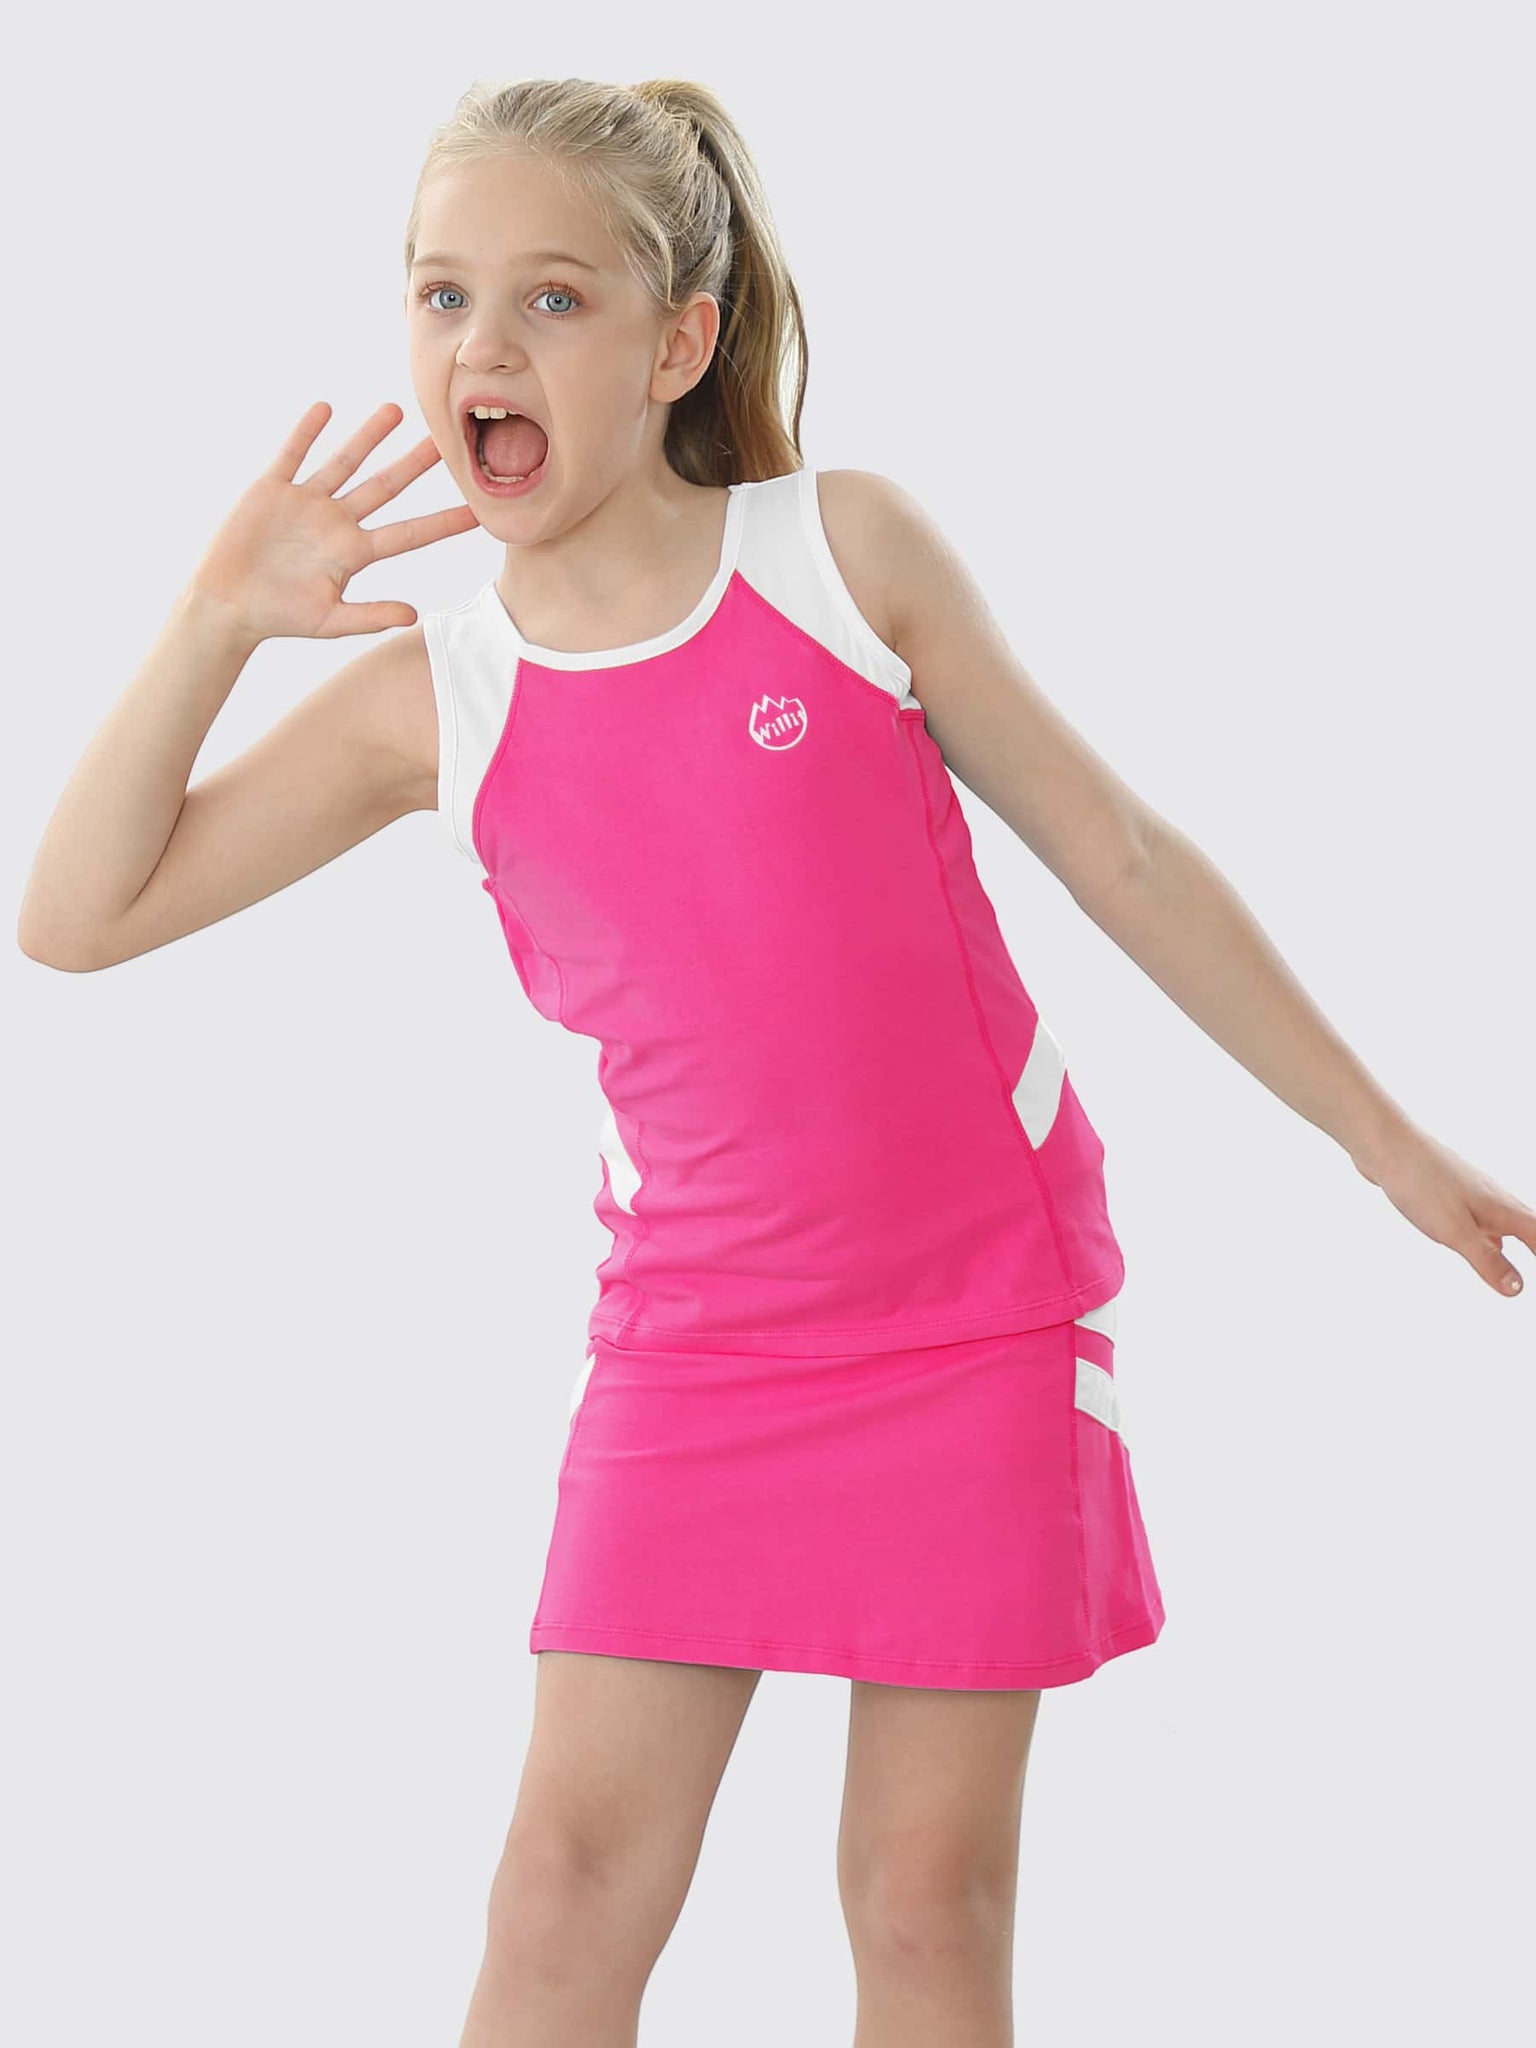 Willit Girls' Tennis Outfit_RoseRed_model1